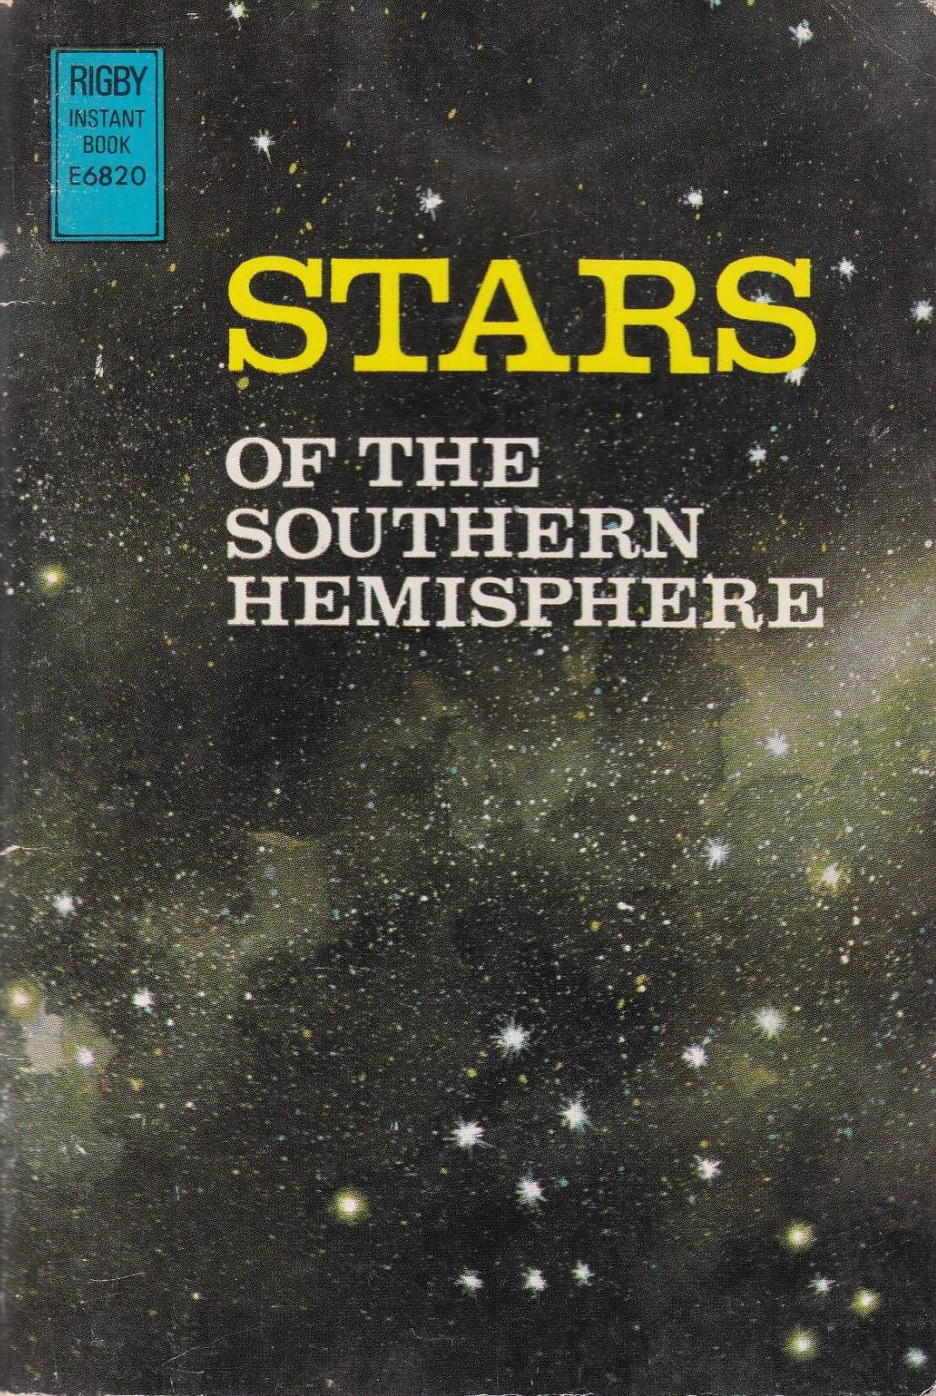 Stars of the Southern Hemisphere (Rigby Instant Books) (image)